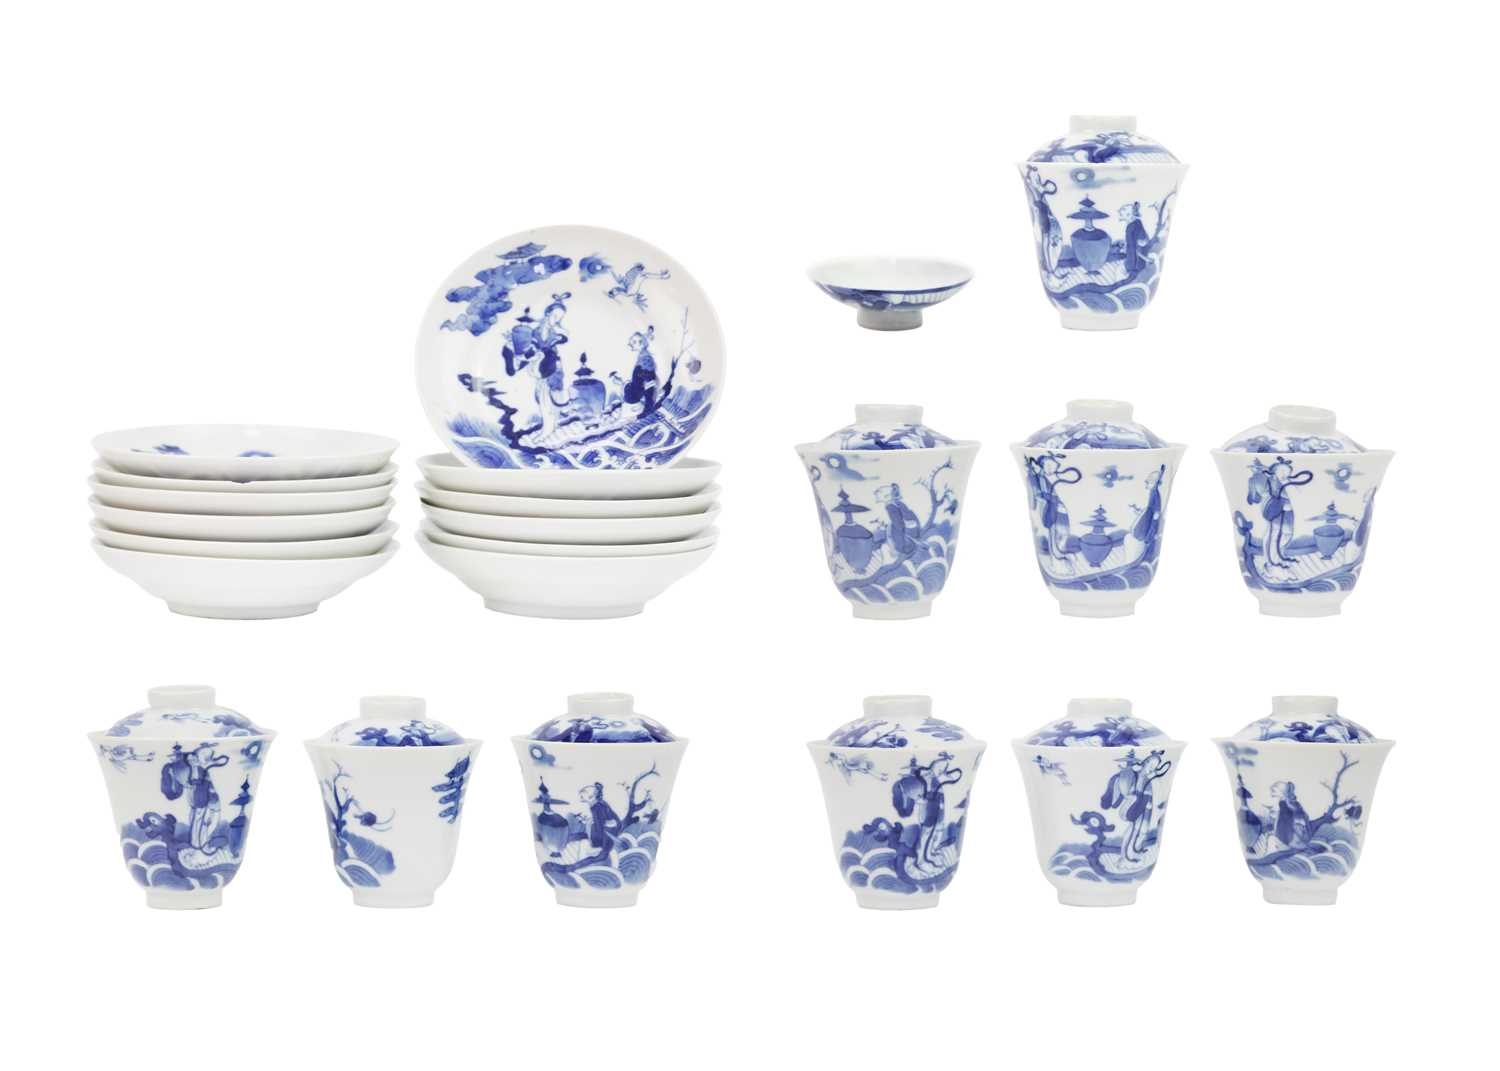 A set of Chinese blue and white porcelain cups, covers and stands, 18th century.